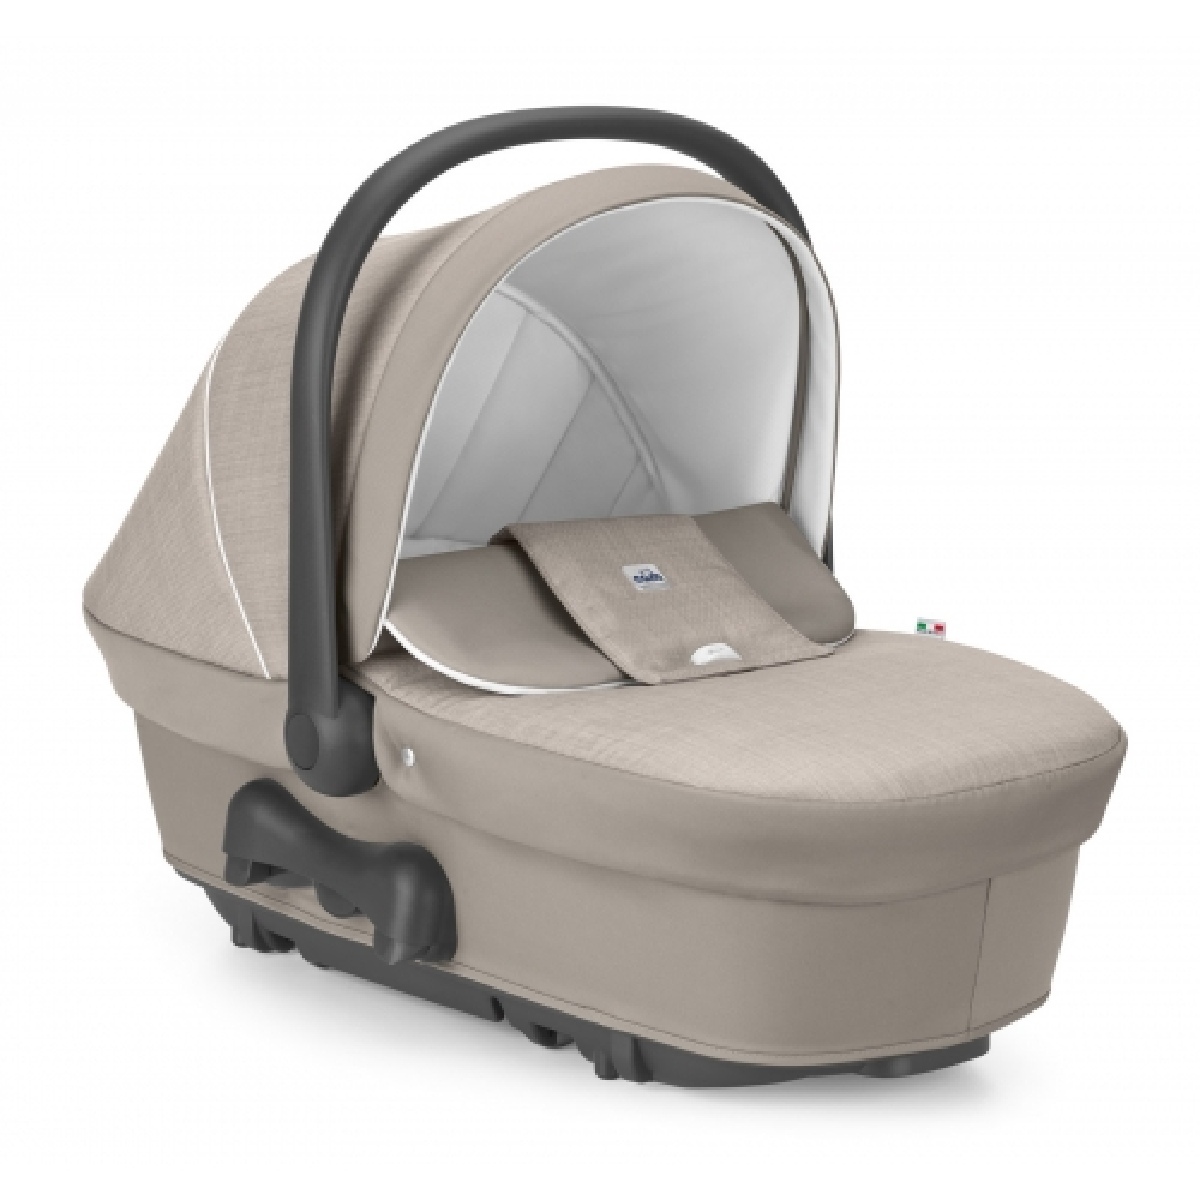 baby-store-dubai Cam - Coccola Baby infant Carrycot travel full body support, Beside sleeper, Bassinet, Portable bed, brethable cotton, Pressure protection, outdoor, picnic and travel - Beige